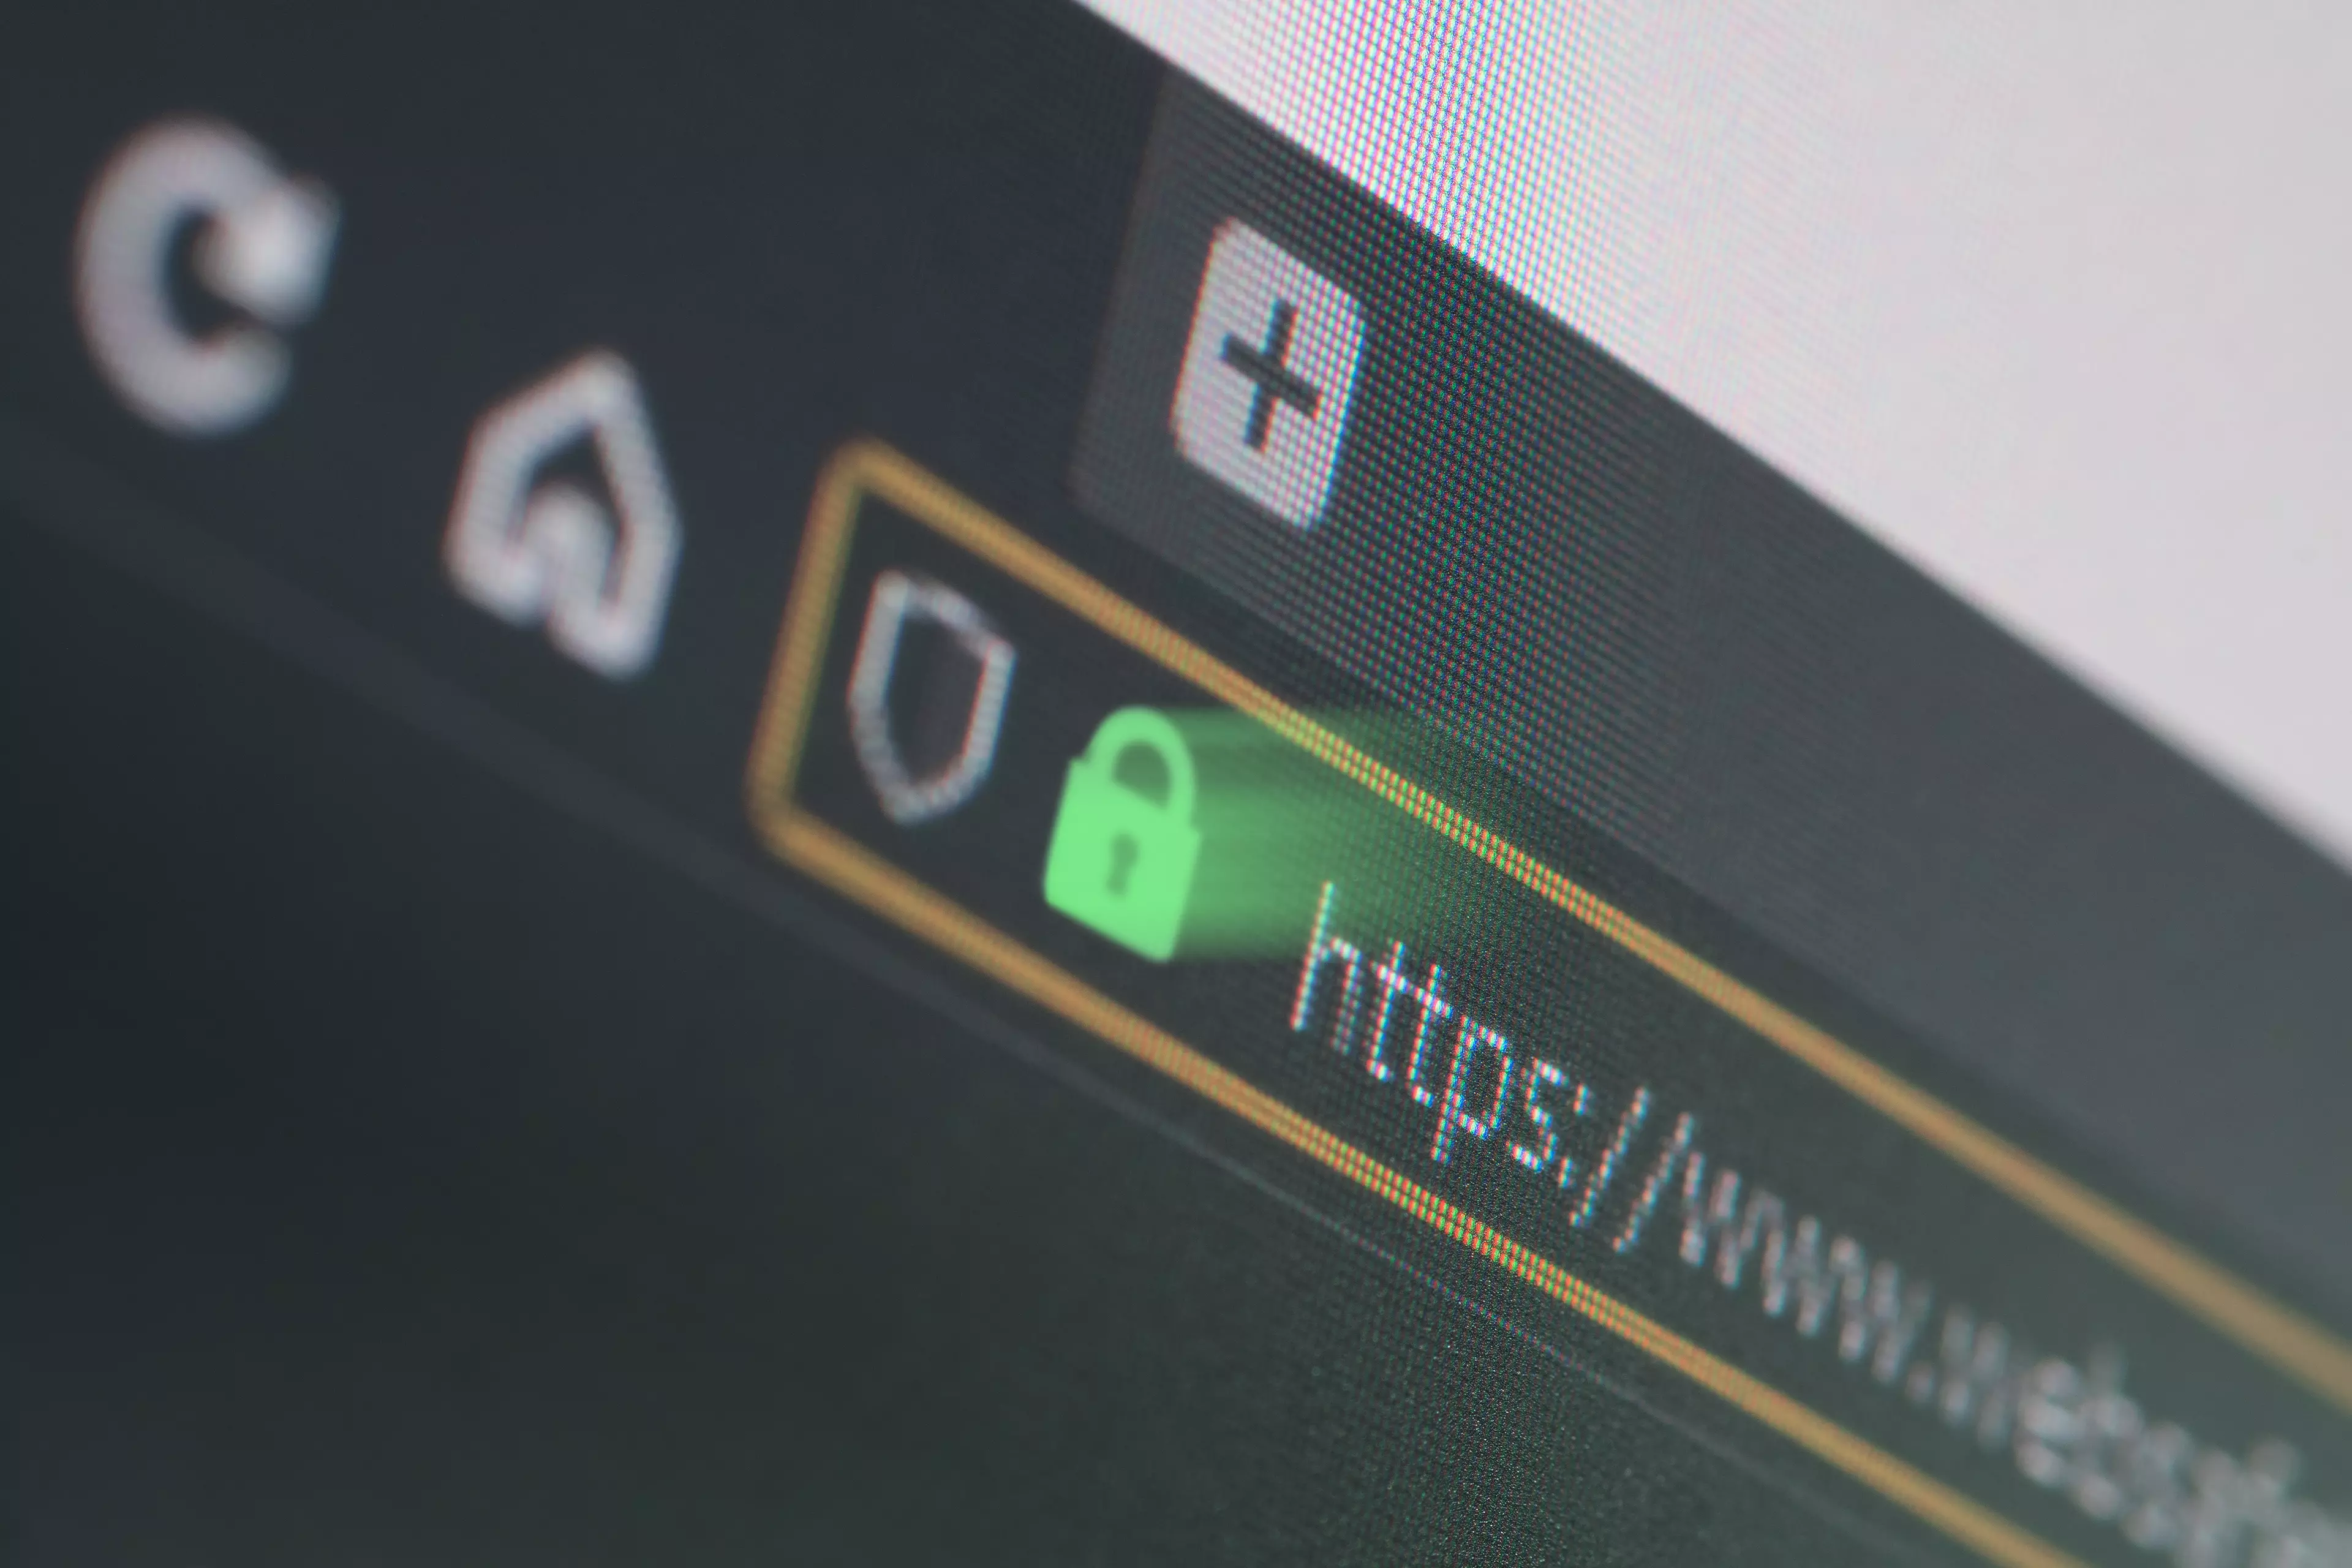  Web browser's address bar with a shining, green padlock icon.